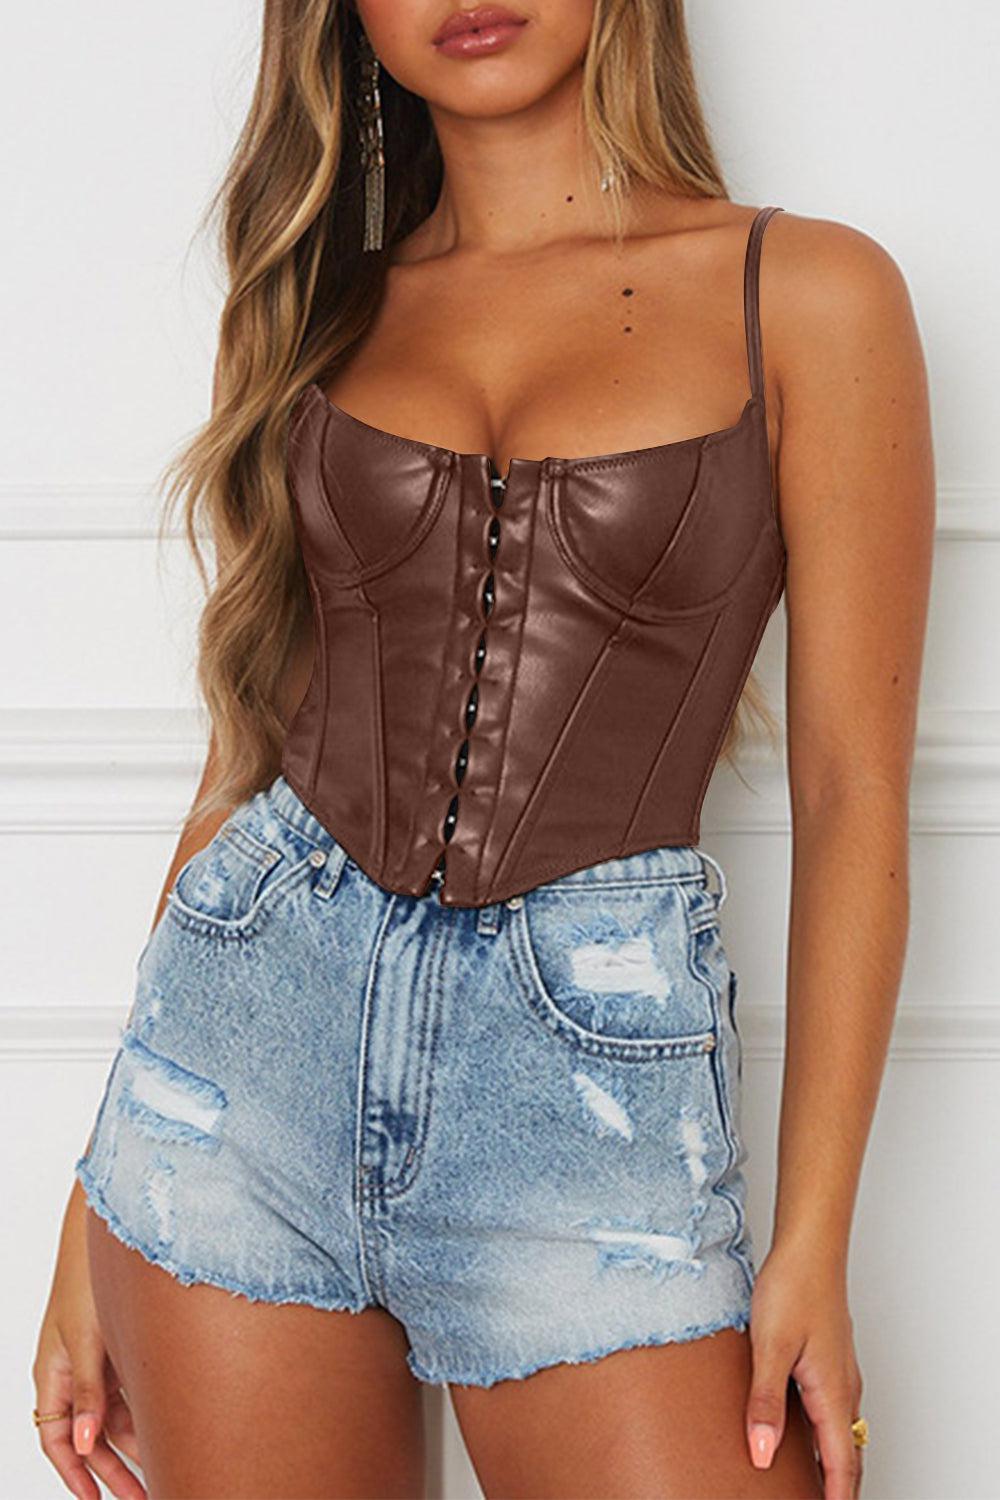 a woman wearing a brown leather corset